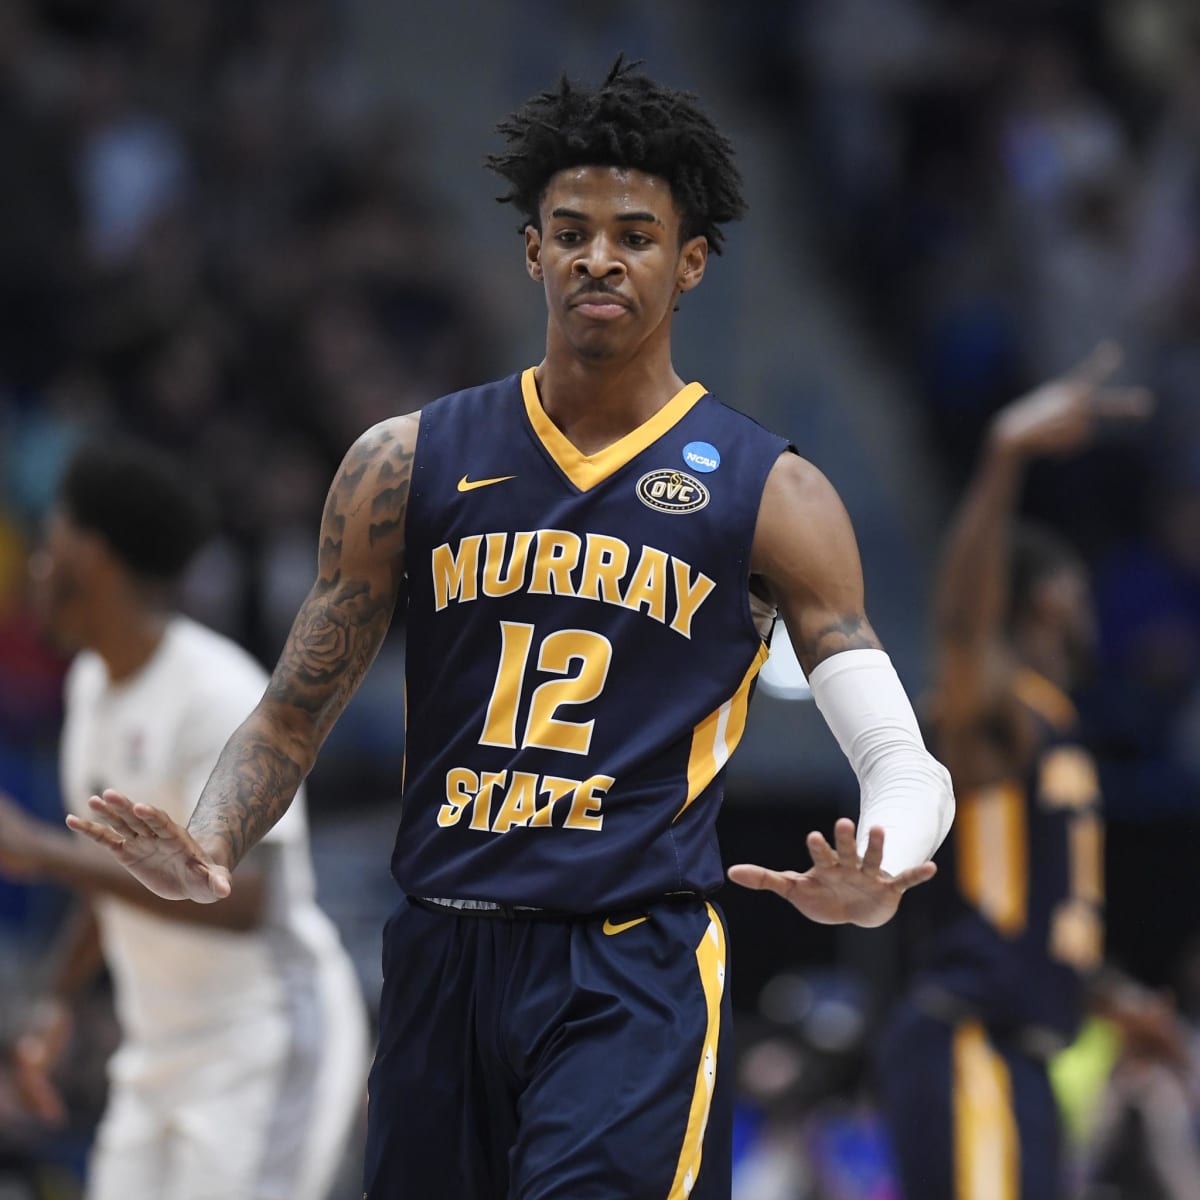 Jay-Lo Fitness - “JT Loper Is Now Apart Of Team Ja Morant” Ja Morant Is The  Real Deal!!!! “JT, you are on the right track so just keep listening to  your dad”